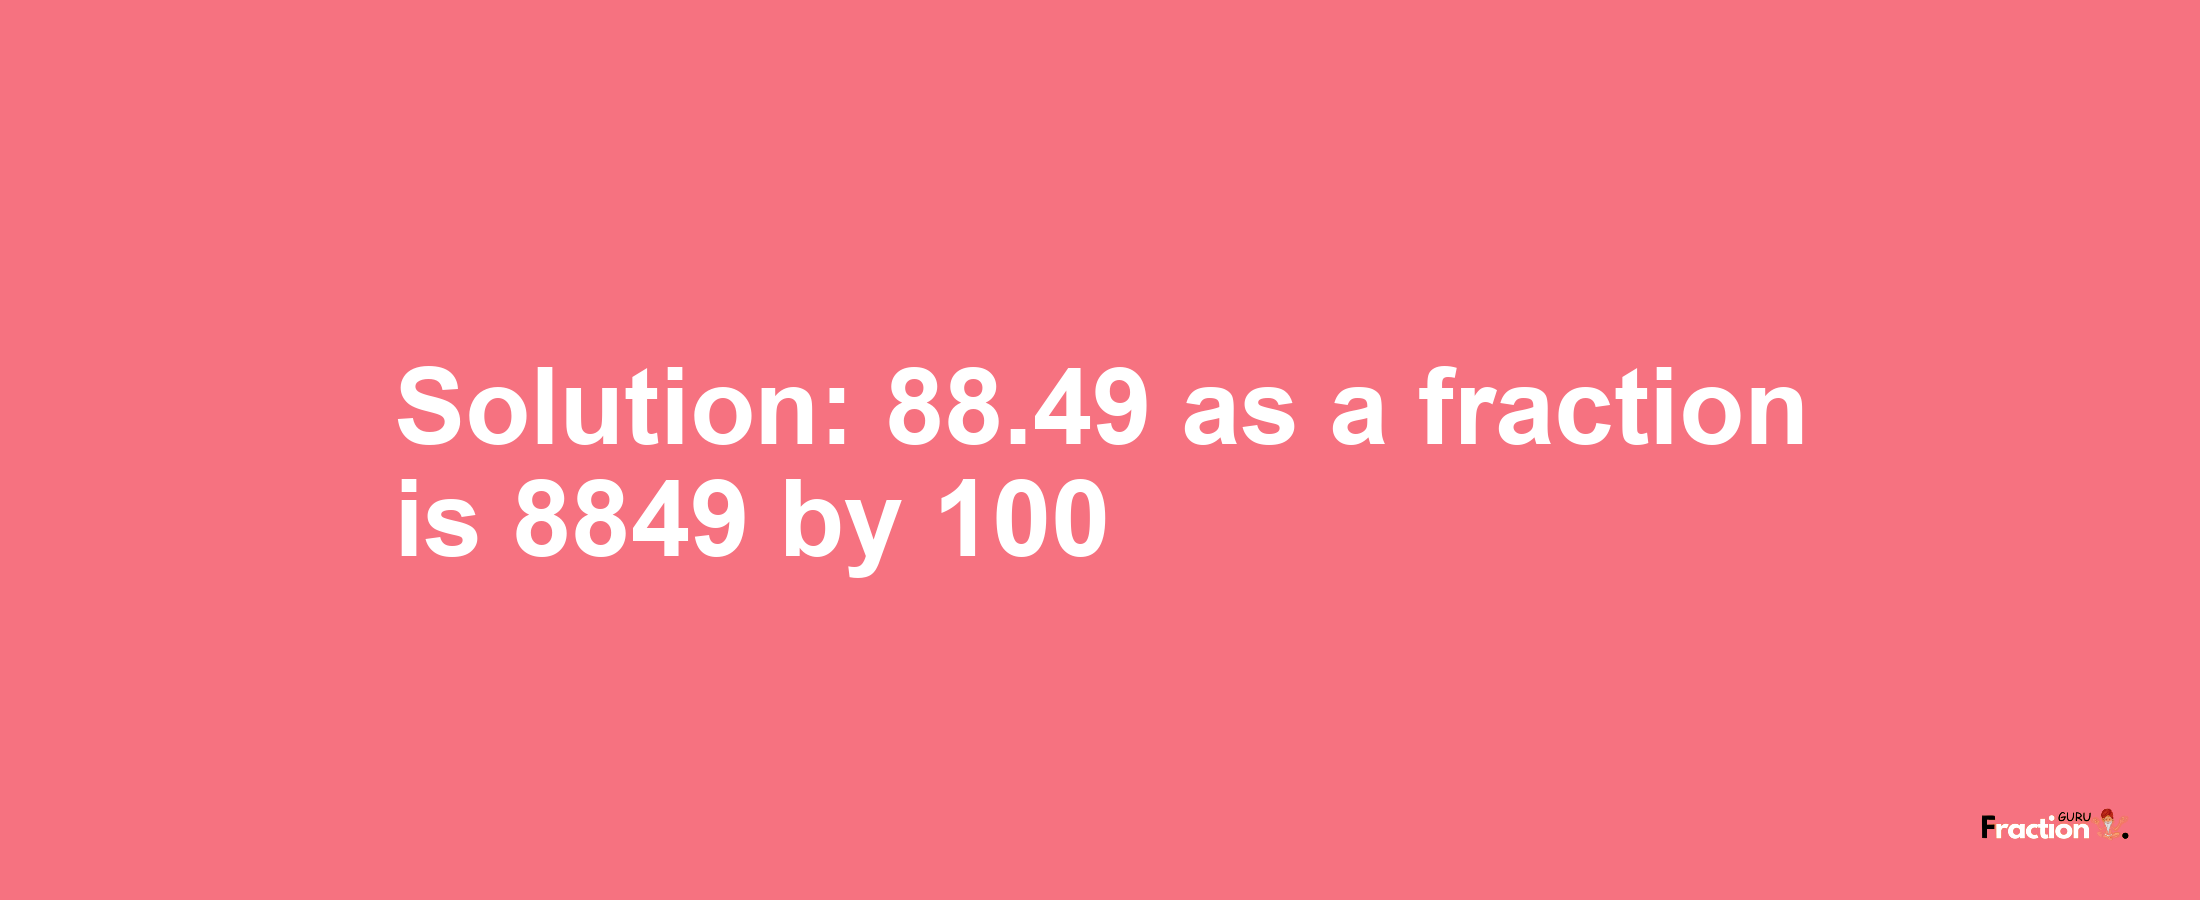 Solution:88.49 as a fraction is 8849/100